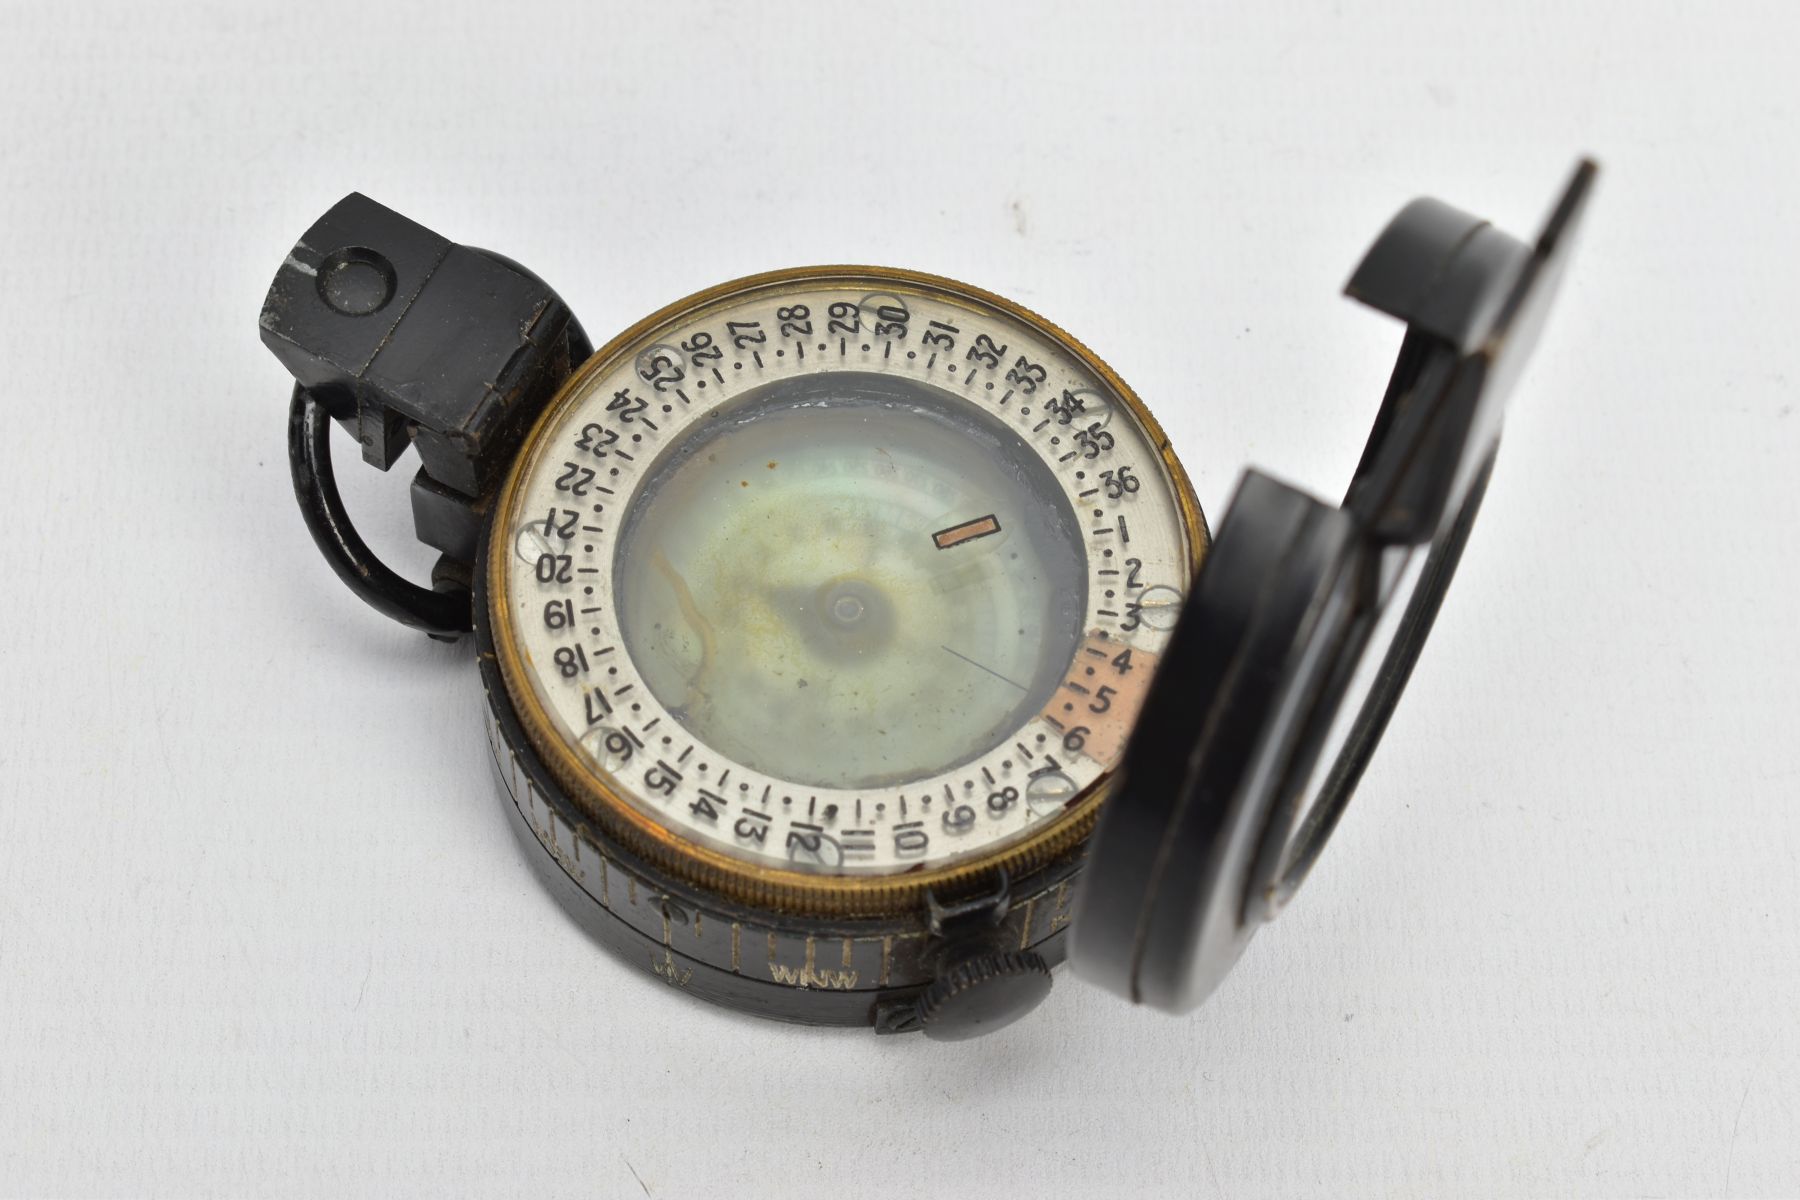 A MILITARY COMPASS, black compass, stamped T.G.C2 Ltd London number 234303, dated 1943 MK III - Image 5 of 7